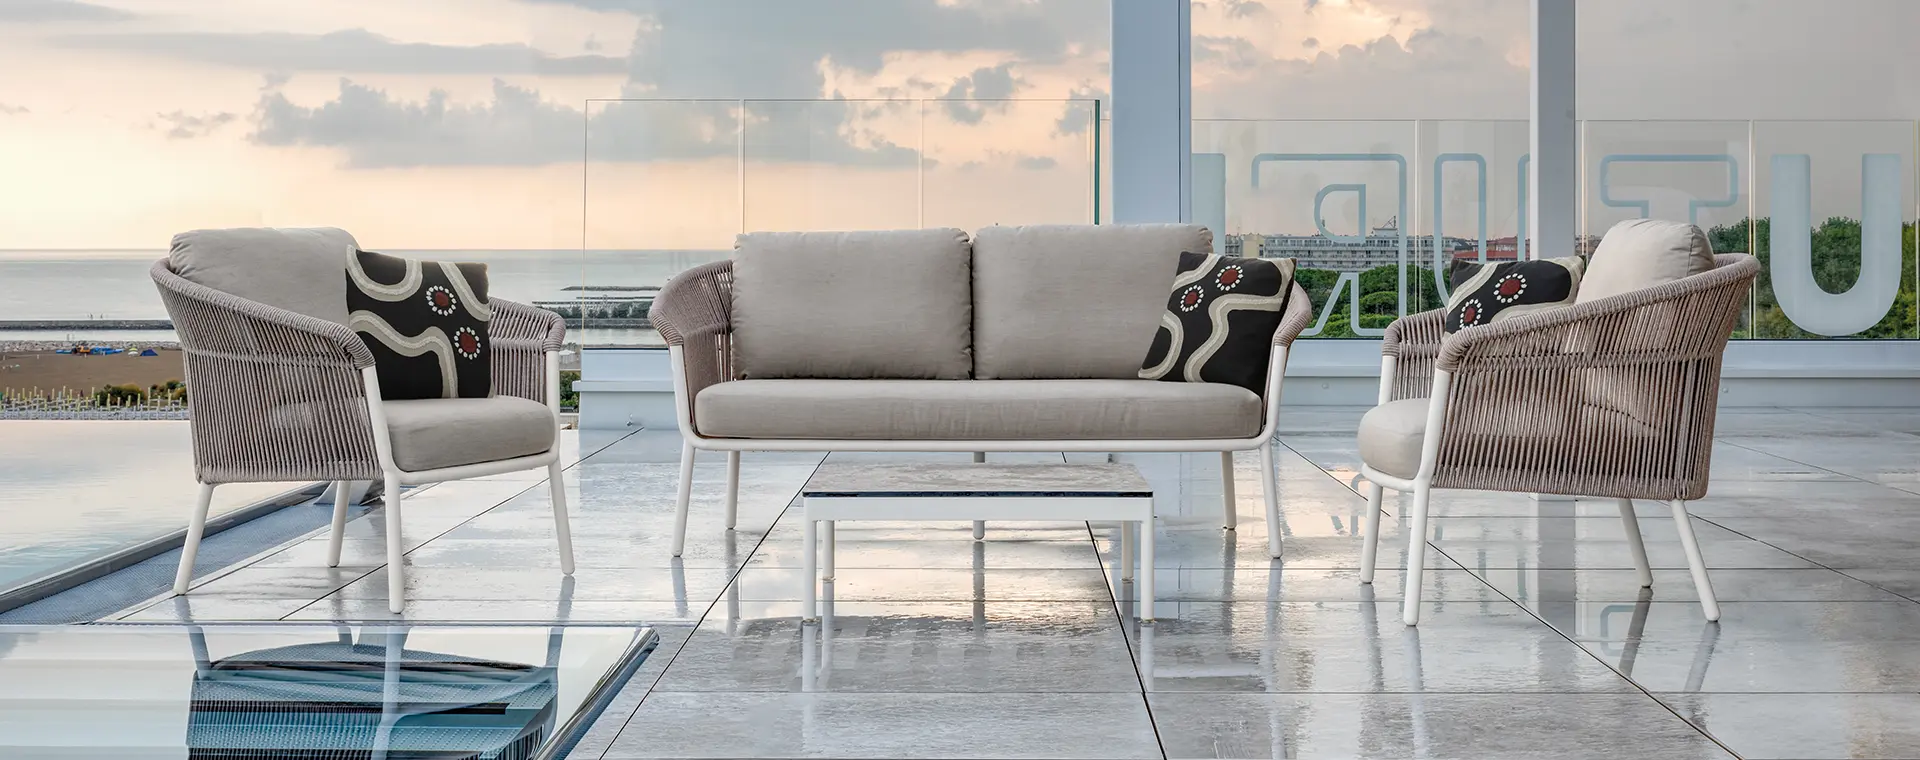 Lake collection : Lounge sets, sofas, armchairs and coffee tables for outdoor furnishing